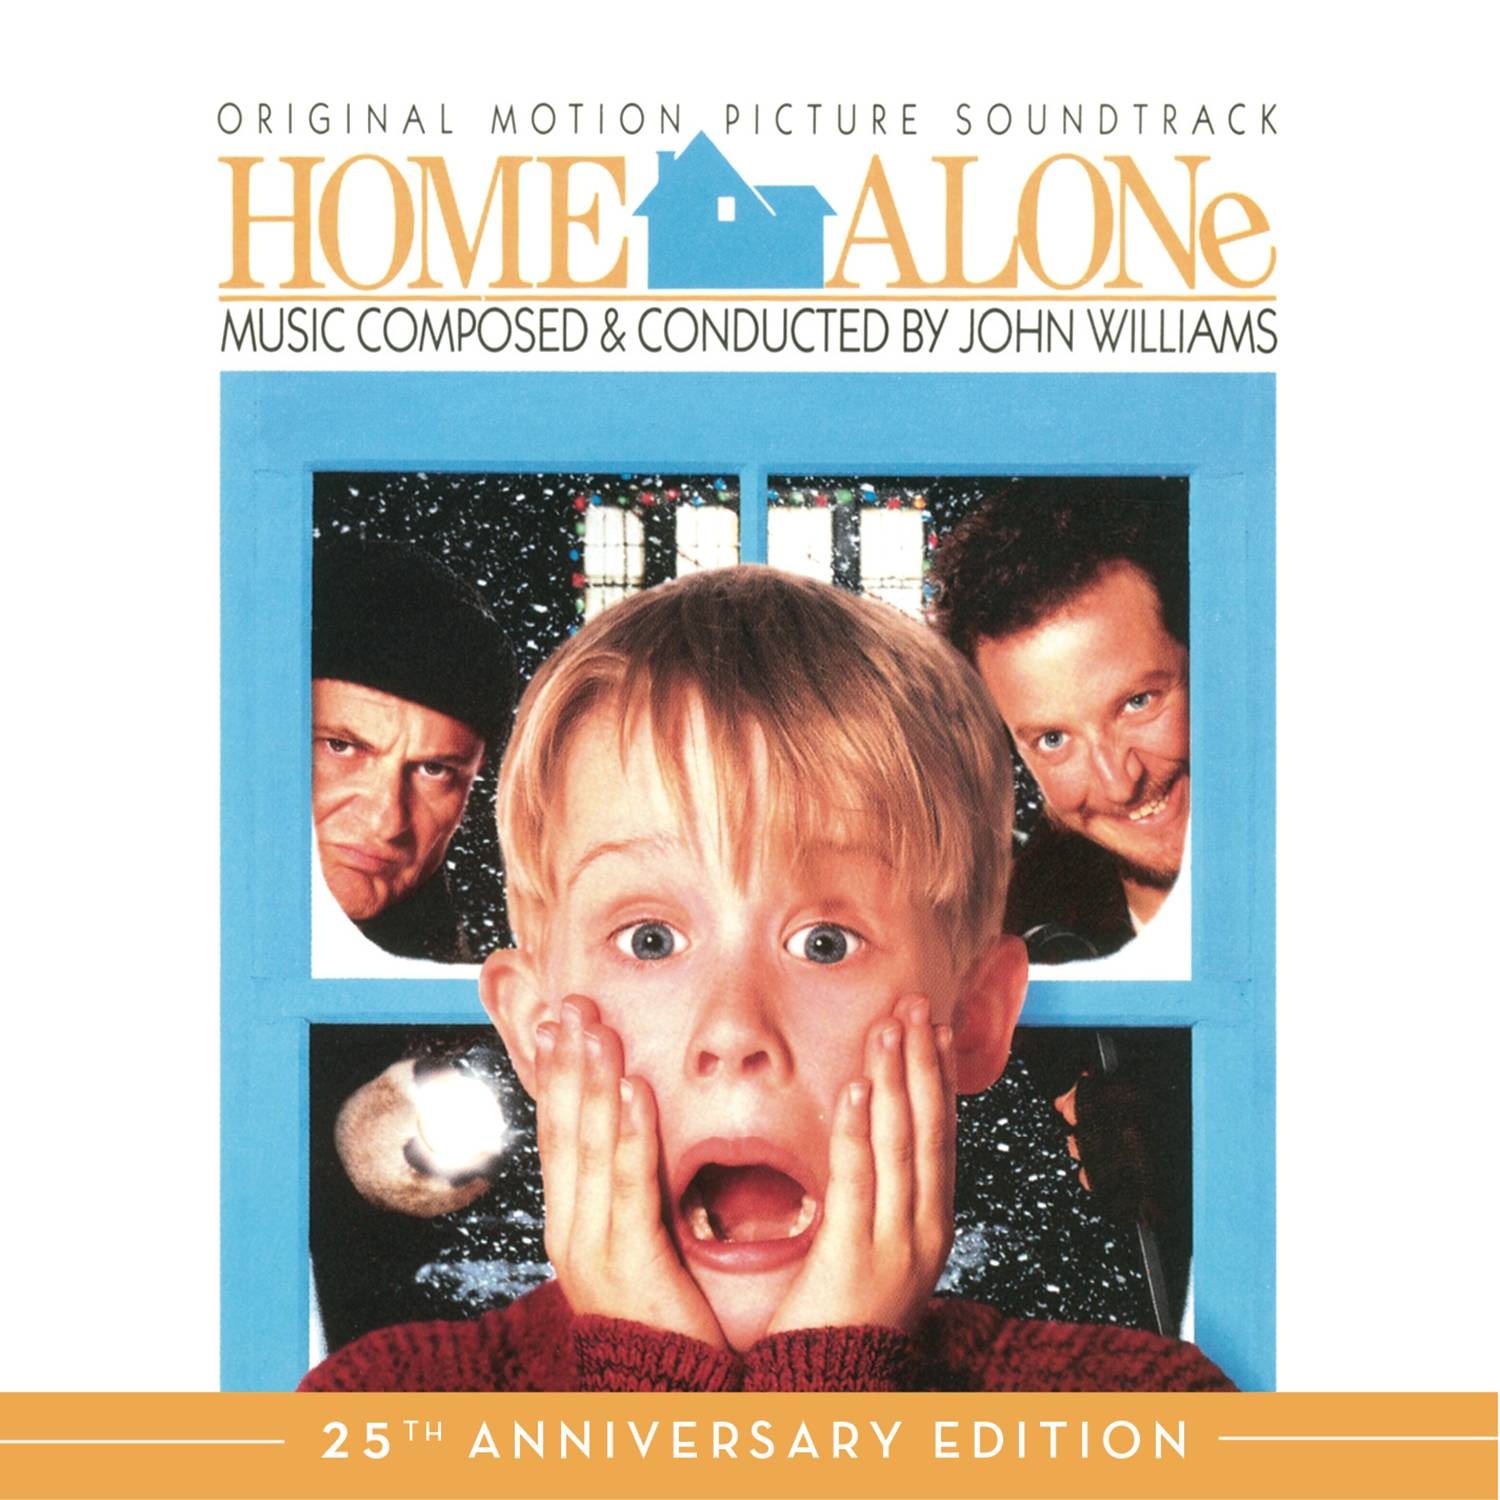 Main Title from Home Alone ("Somewhere in My Memory") (Voice)